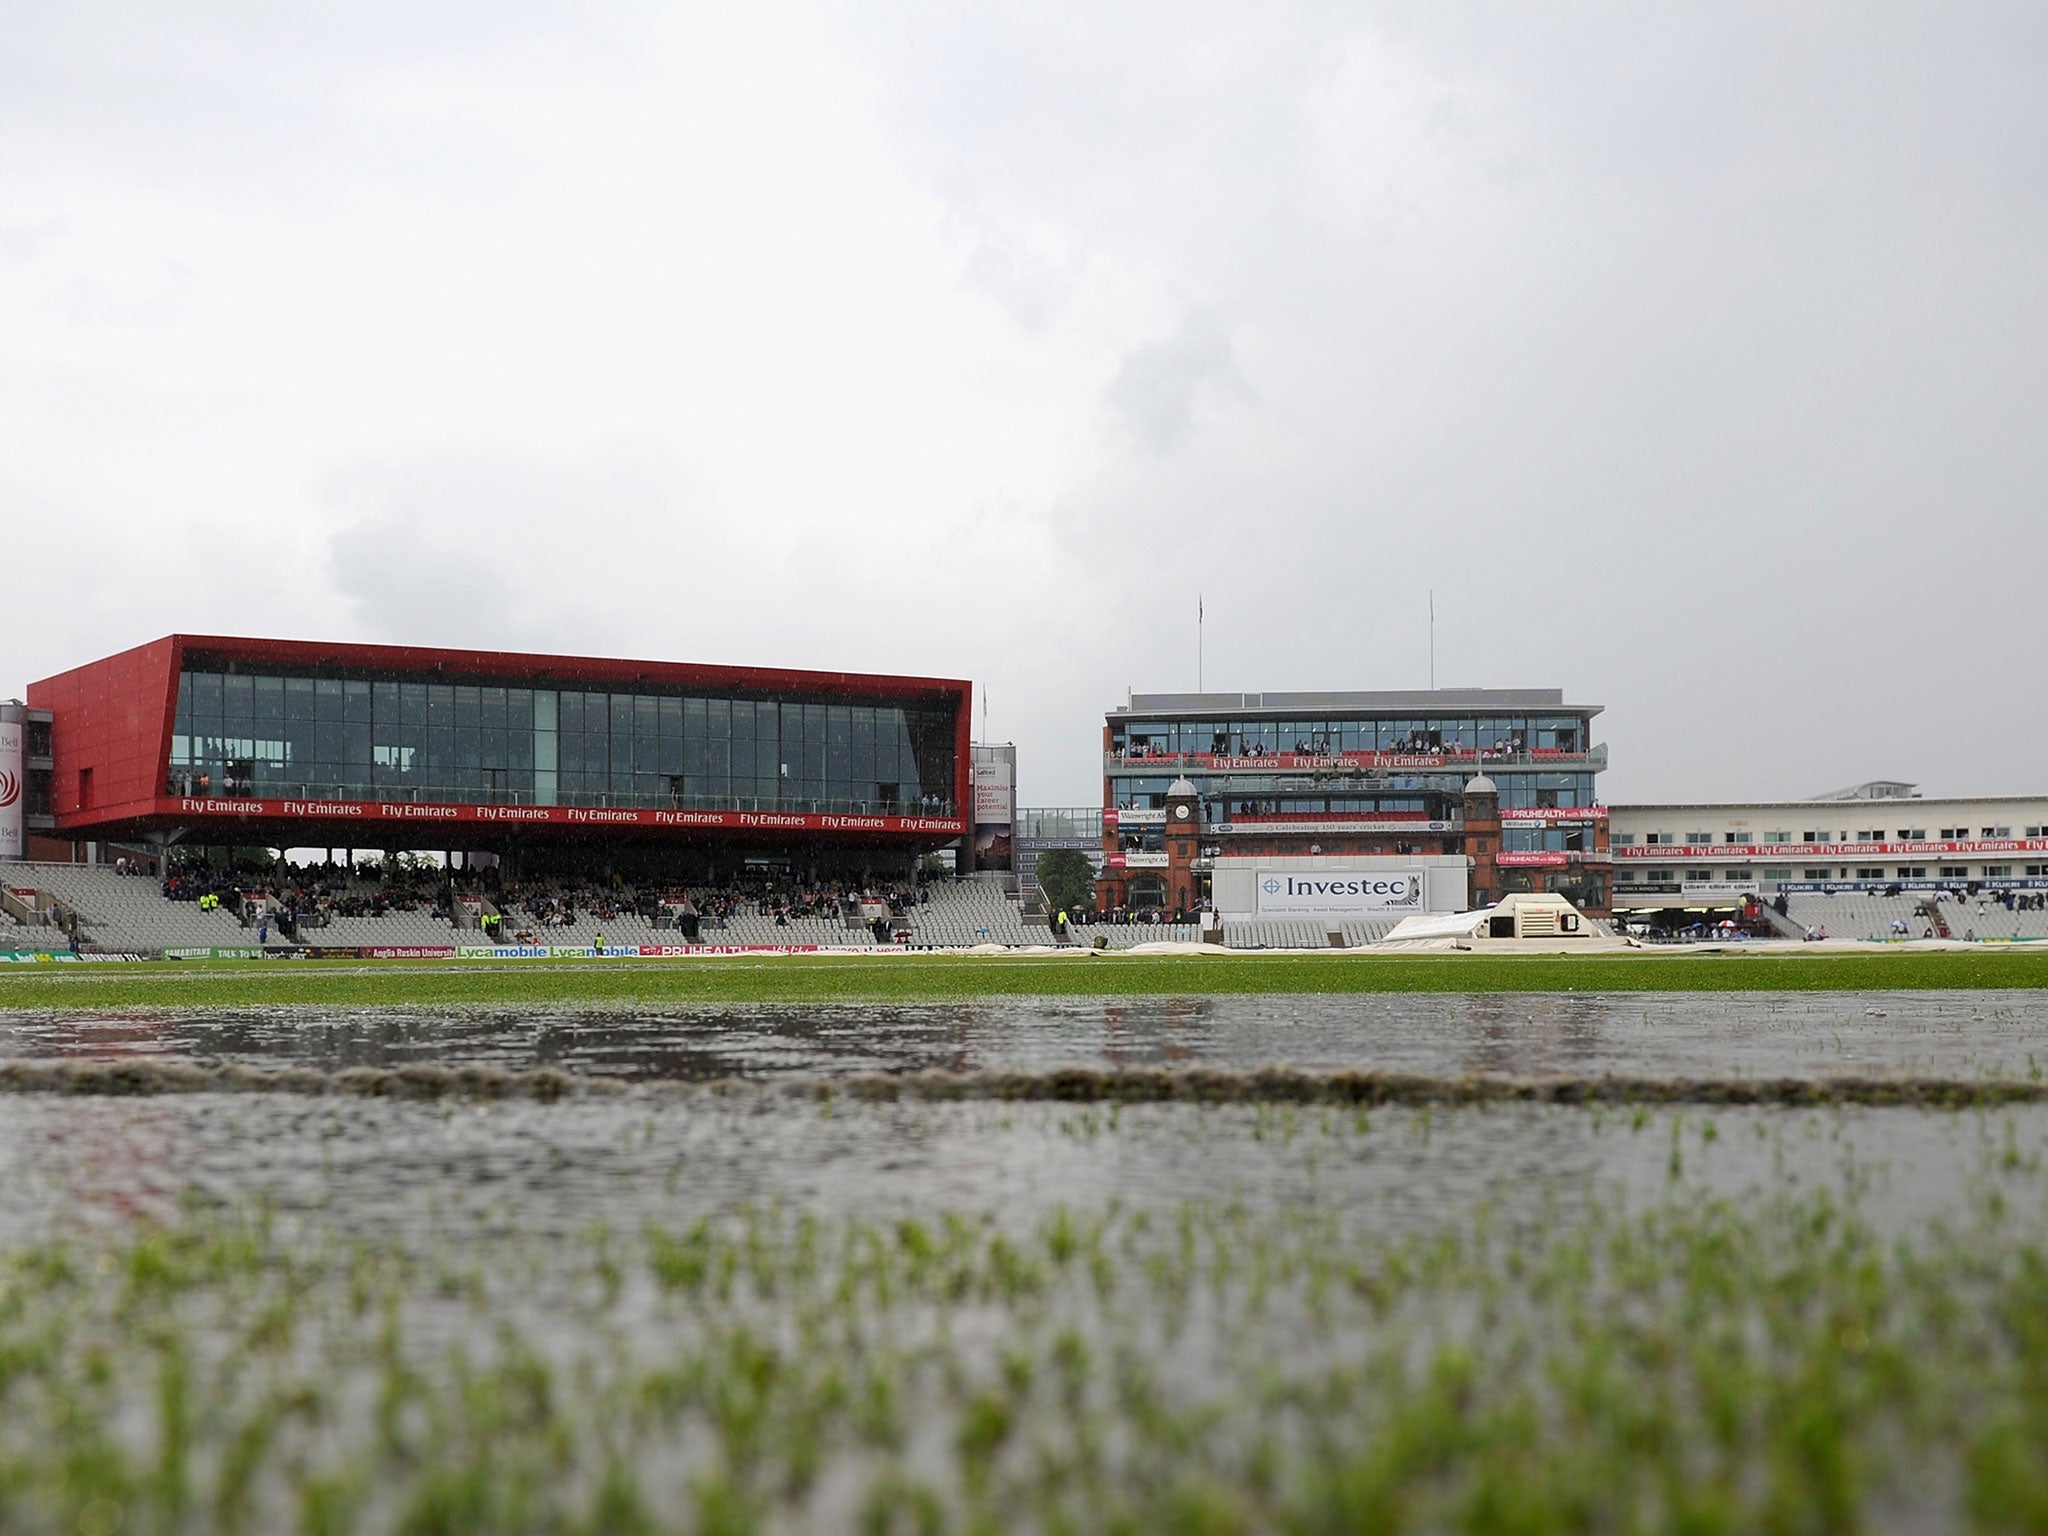 The wet conditions at Old Trafford during day two of the fourth Test between England and India